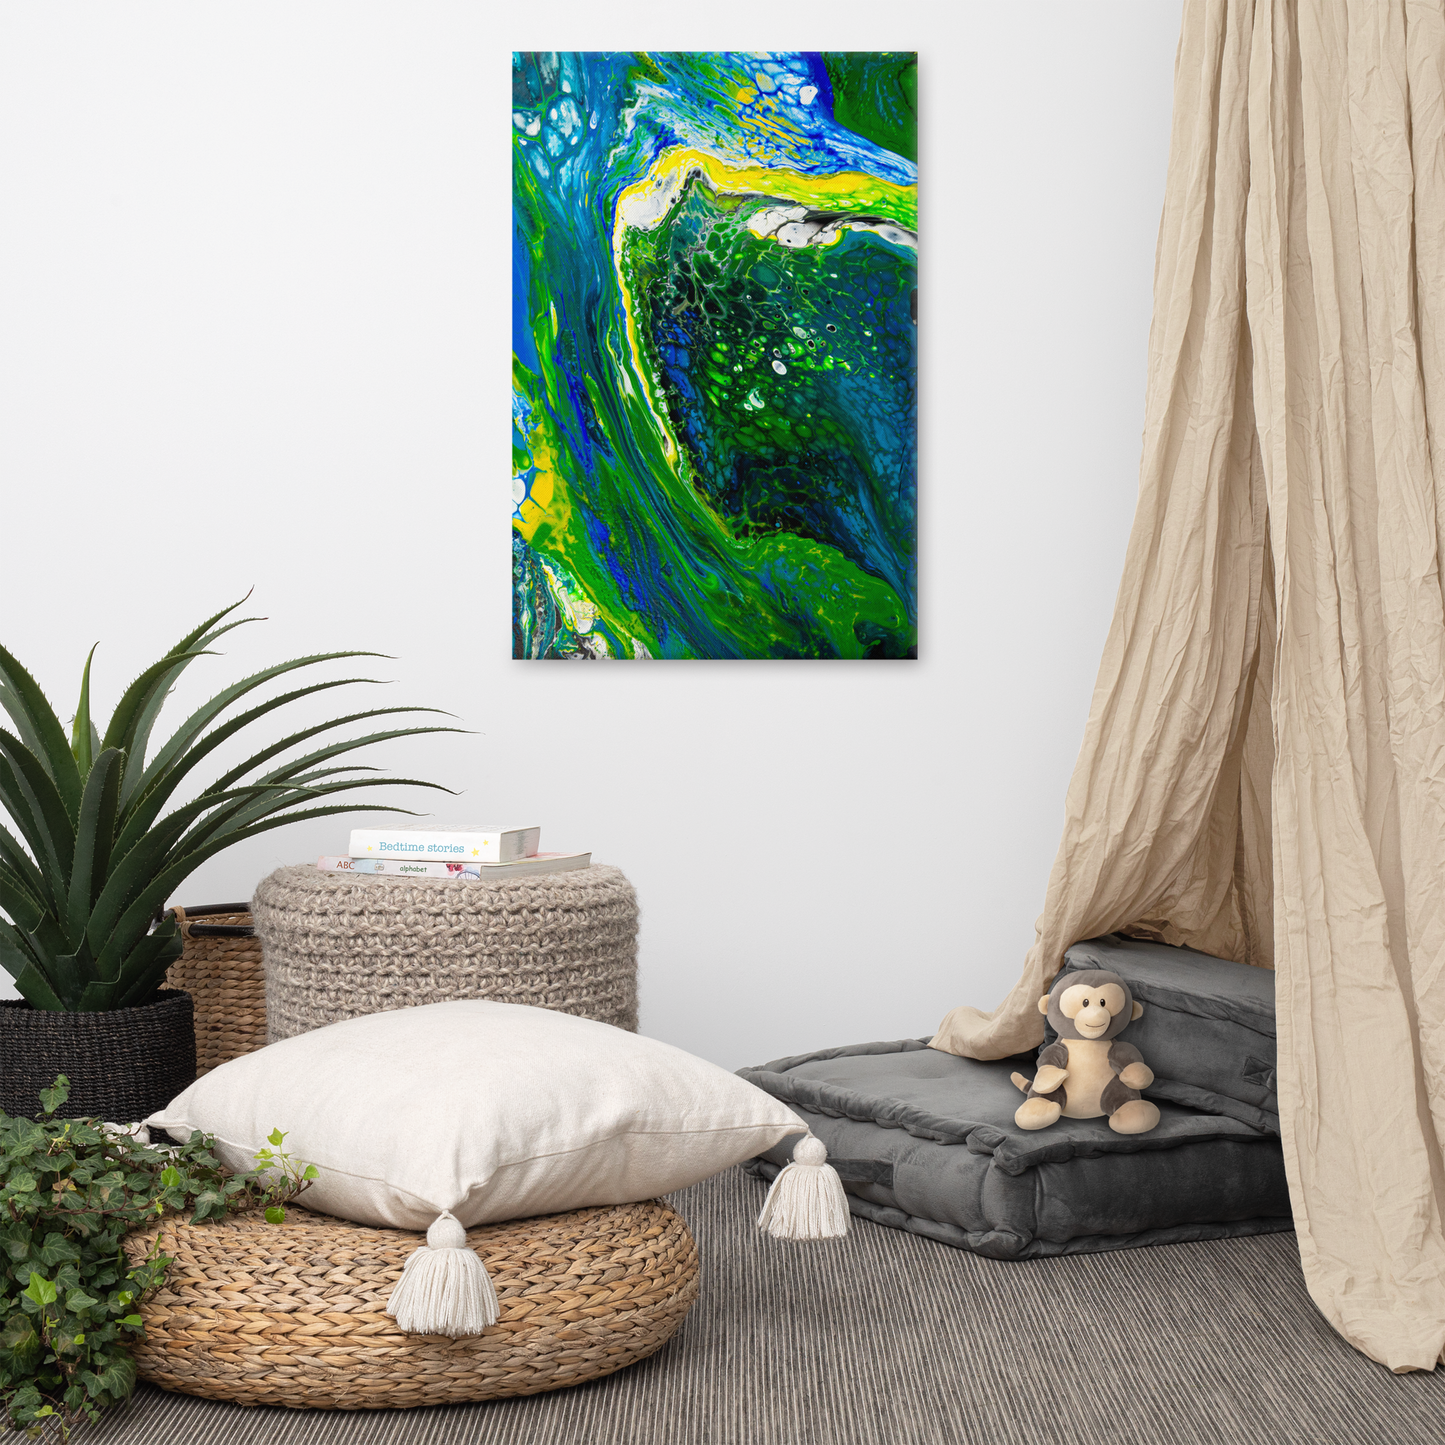 NightOwl Studio Abstract Wall Art, Green Stream, Boho Living Room, Bedroom, Office, and Home Decor, Premium Canvas with Wooden Frame, Acrylic Painting Reproduction, 24” x 36”